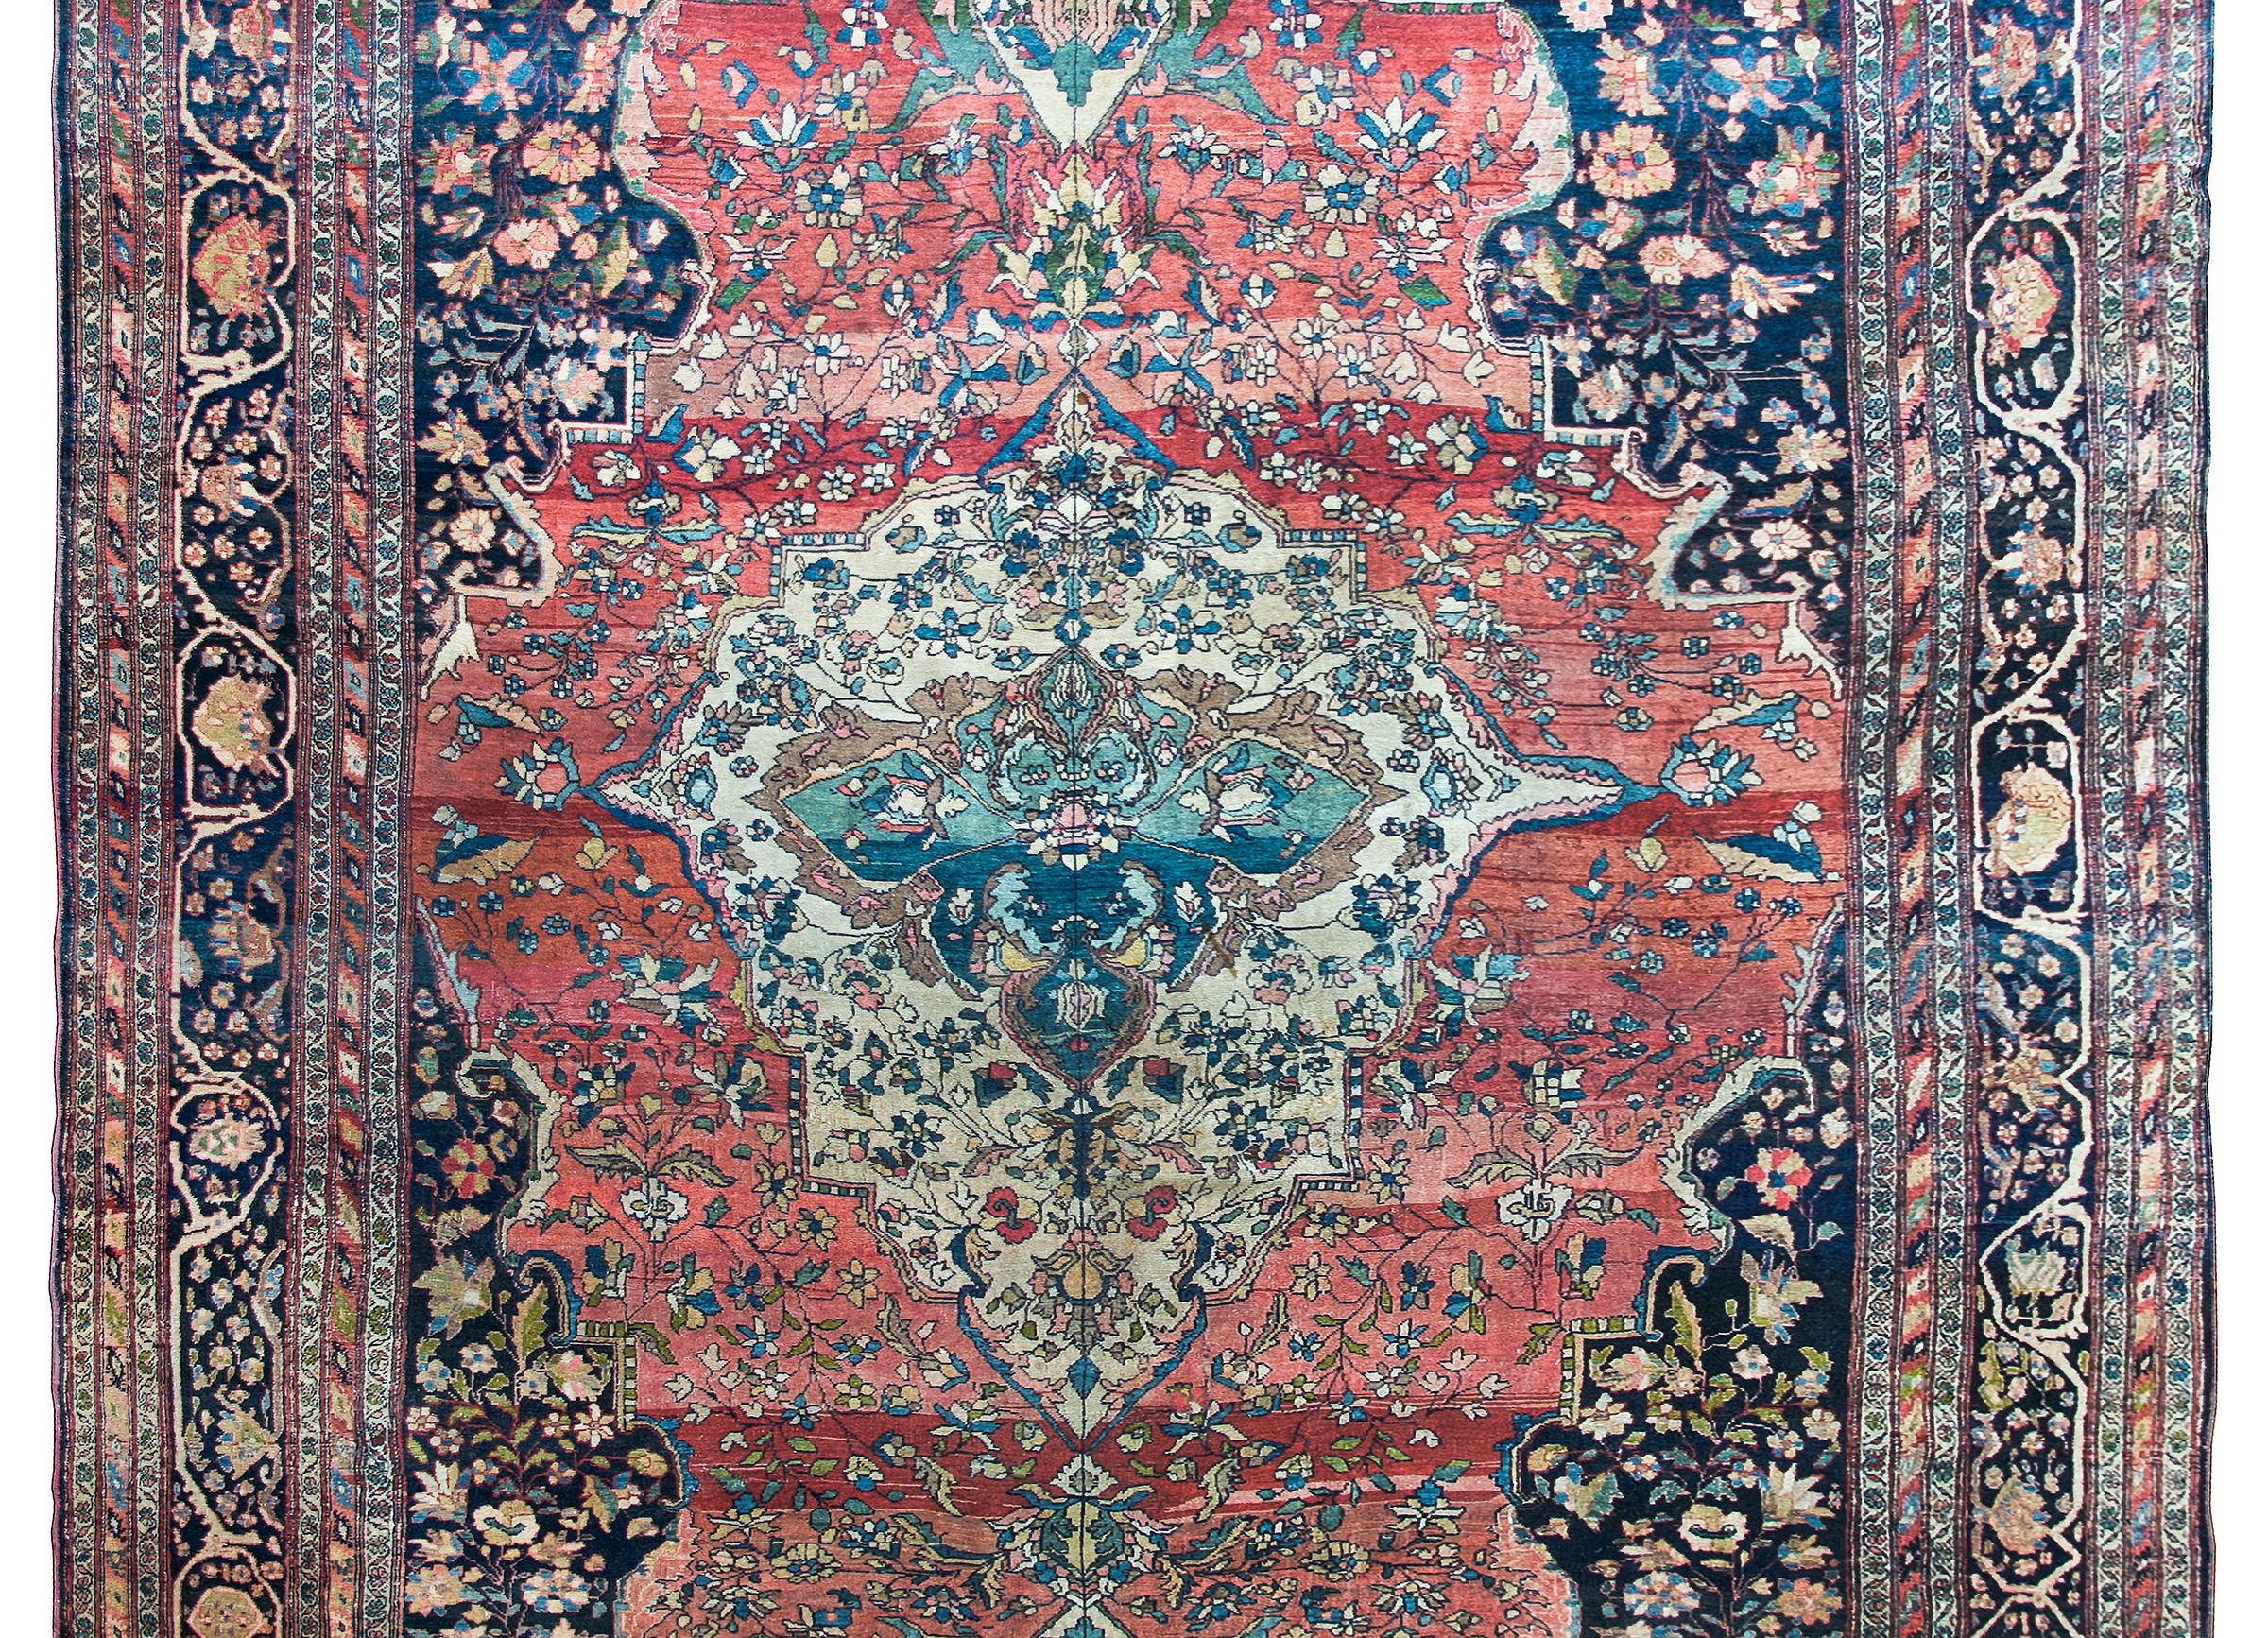 An incredible late 19th century Persian Sarouk Farahan rug with a large central asymmetrical floral medallion with an abrash indigo ground and myriad stylized flowers and scrolling vines living on an abrash crimson ground, and surrounded by a